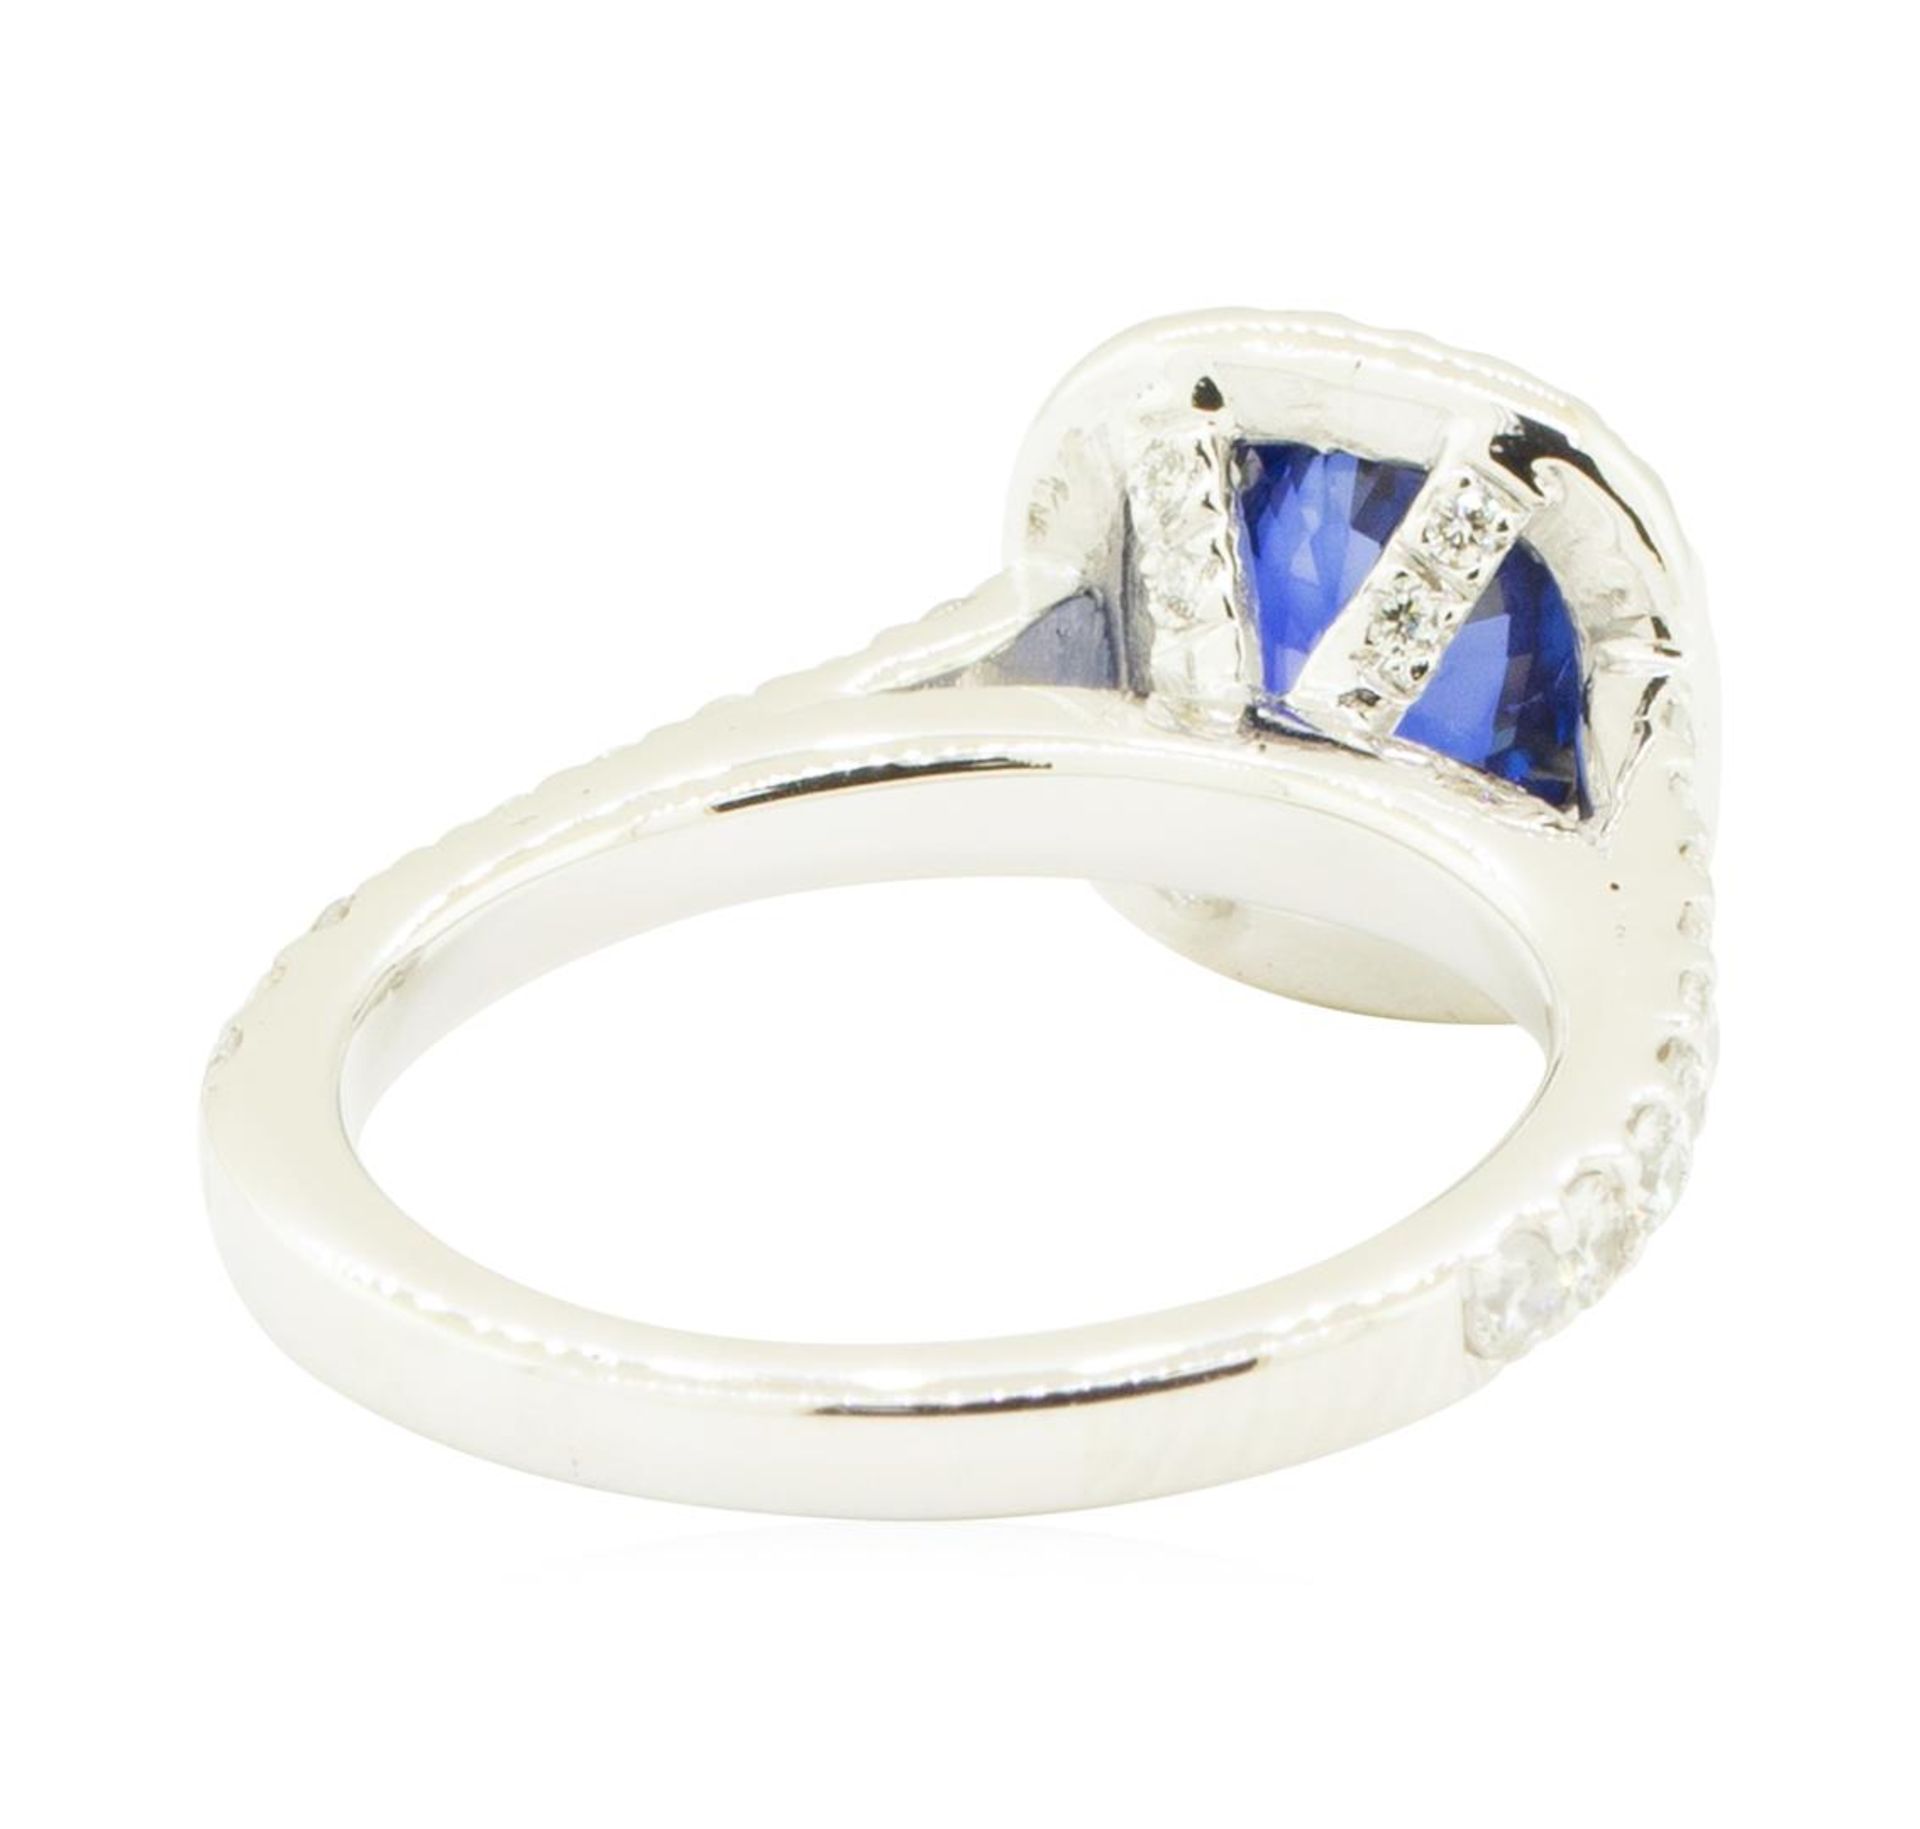 1.94 ctw Oval Brilliant Blue Sapphire And Diamond Ring - 14KT White Gold - Image 3 of 5